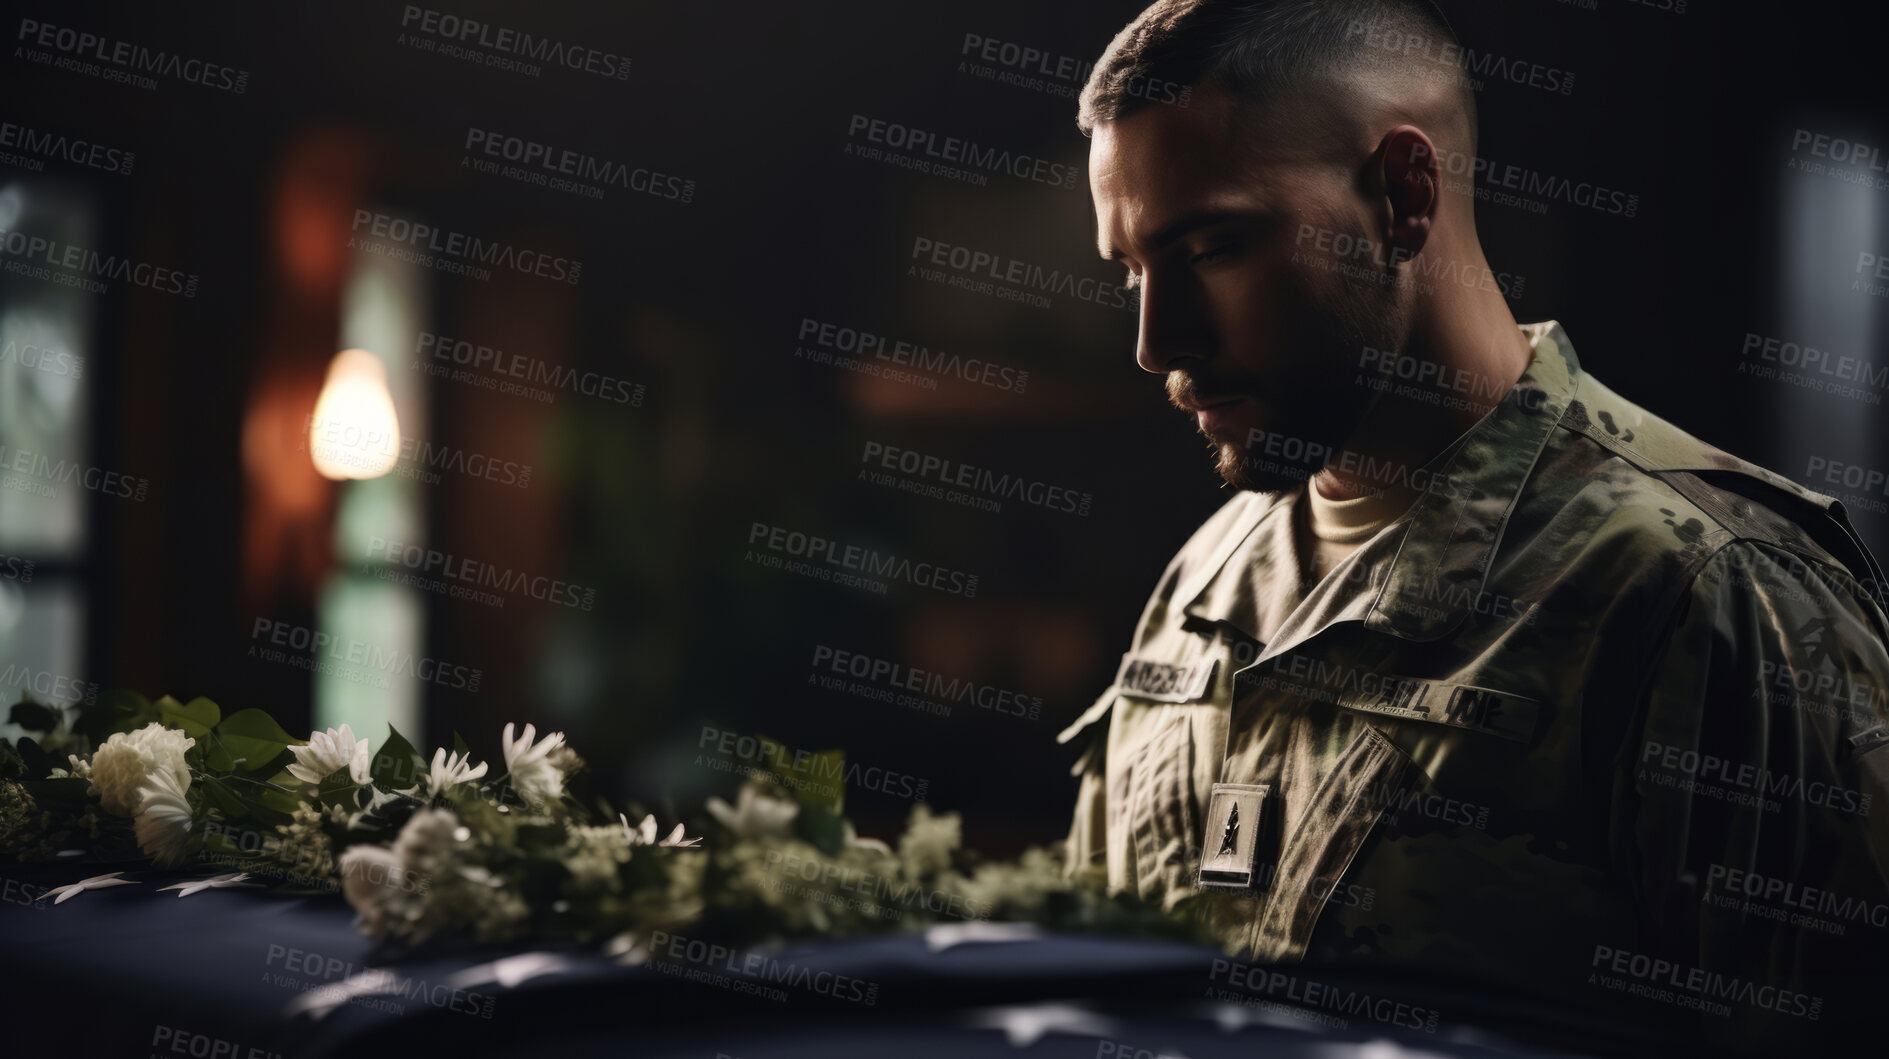 Buy stock photo Soldier mourning death of friend. Standing at coffin. Funeral service.